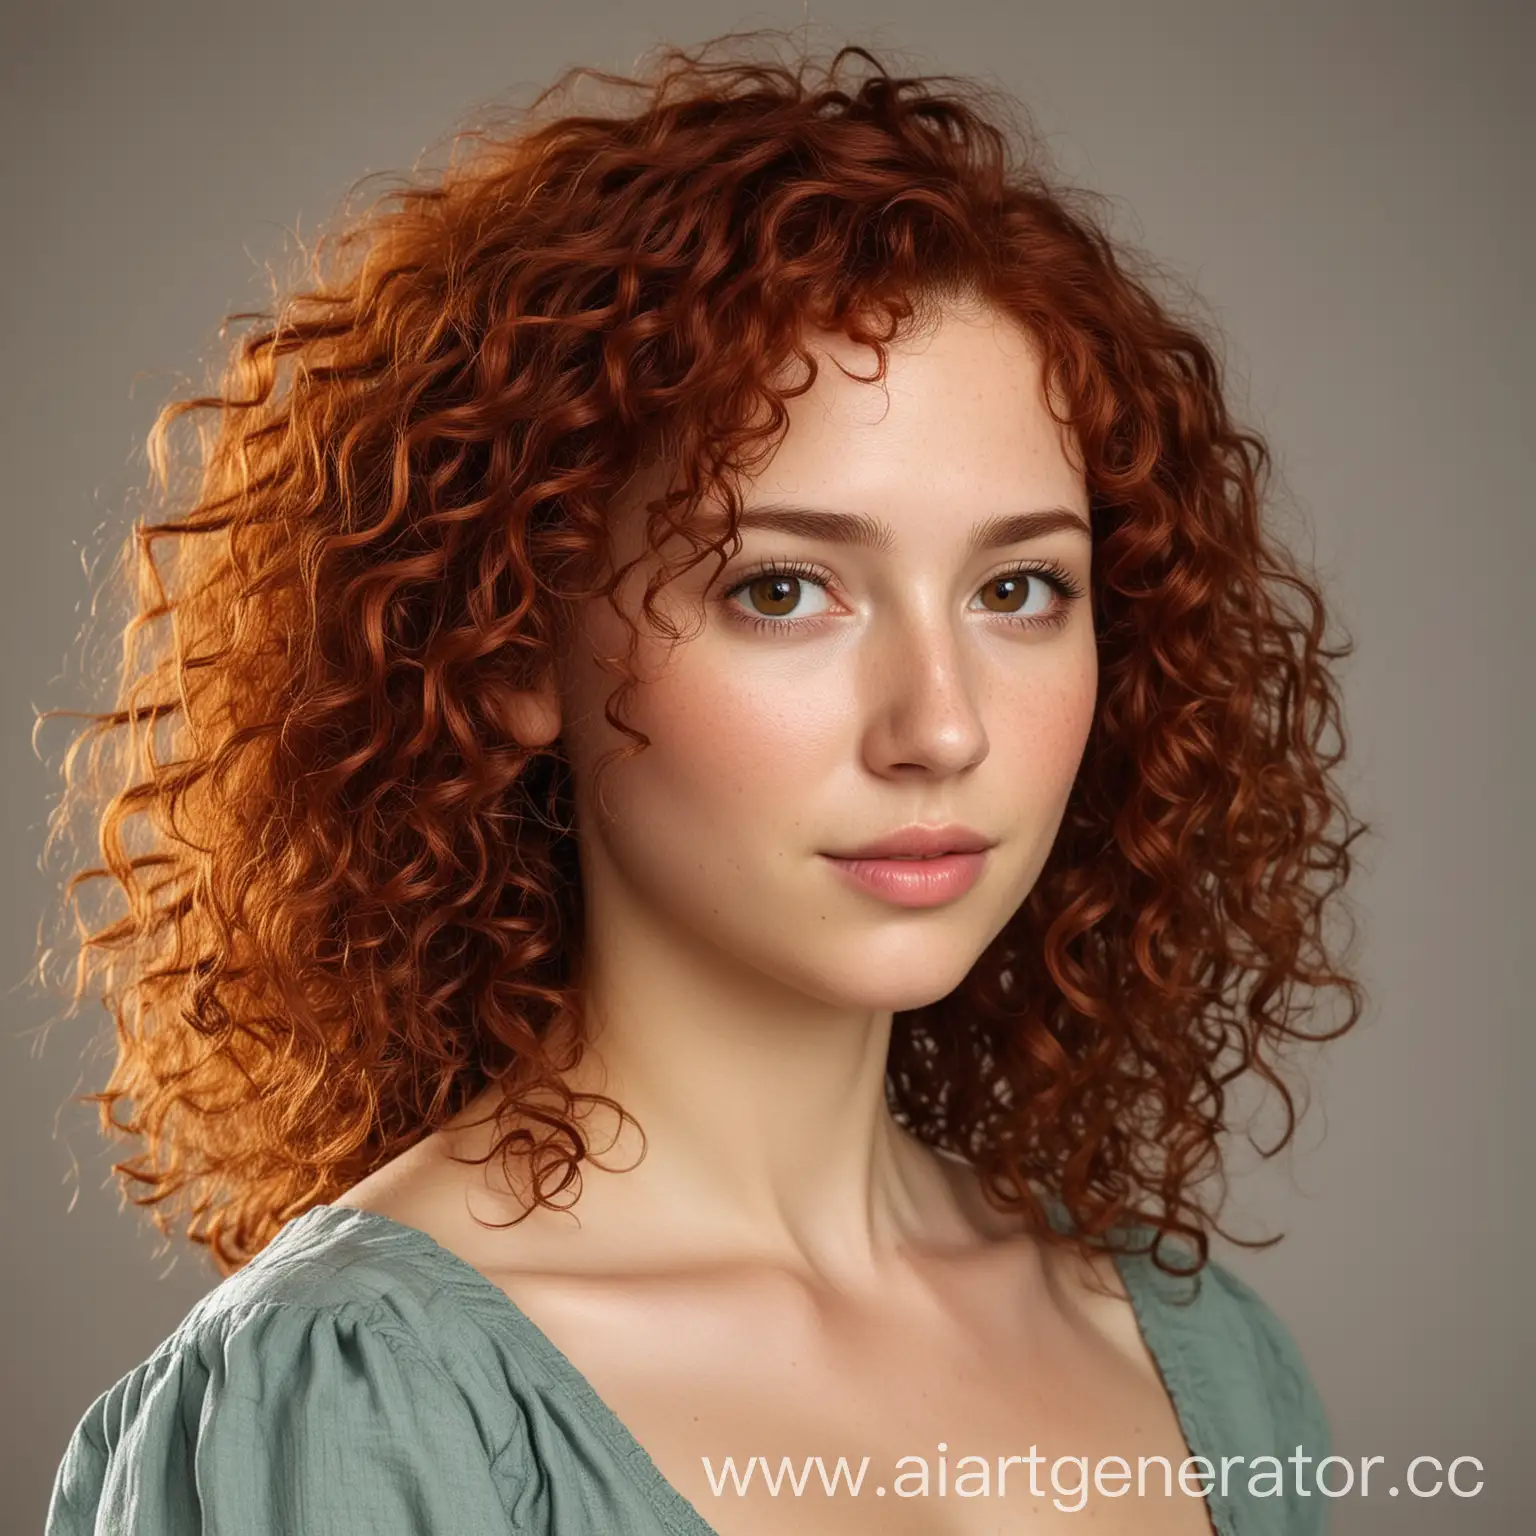 Dreamy-Woman-with-Abundant-Curly-Red-Hair-and-Bright-Brown-Eyes